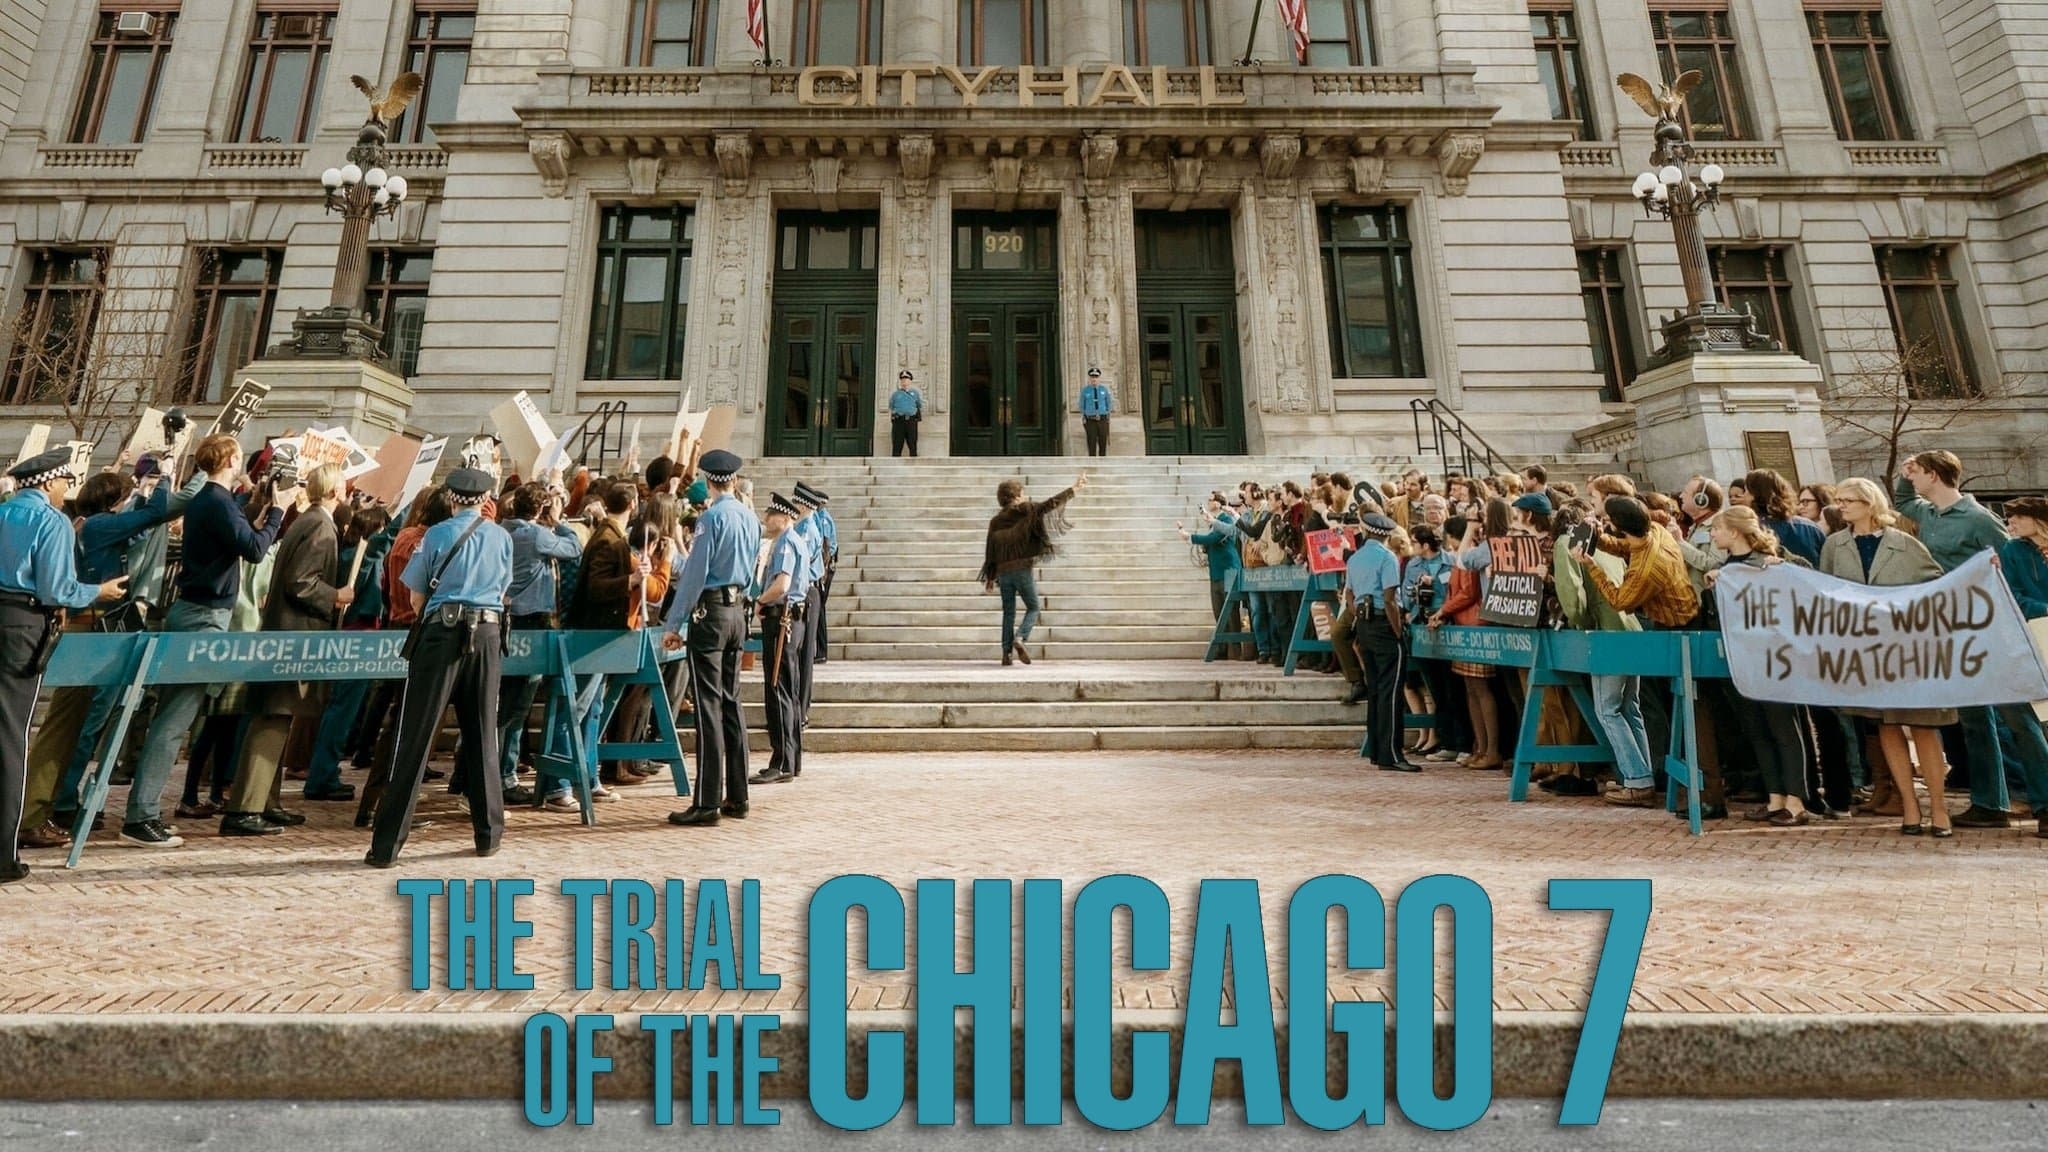 The Trial of the Chicago 7 (2020)